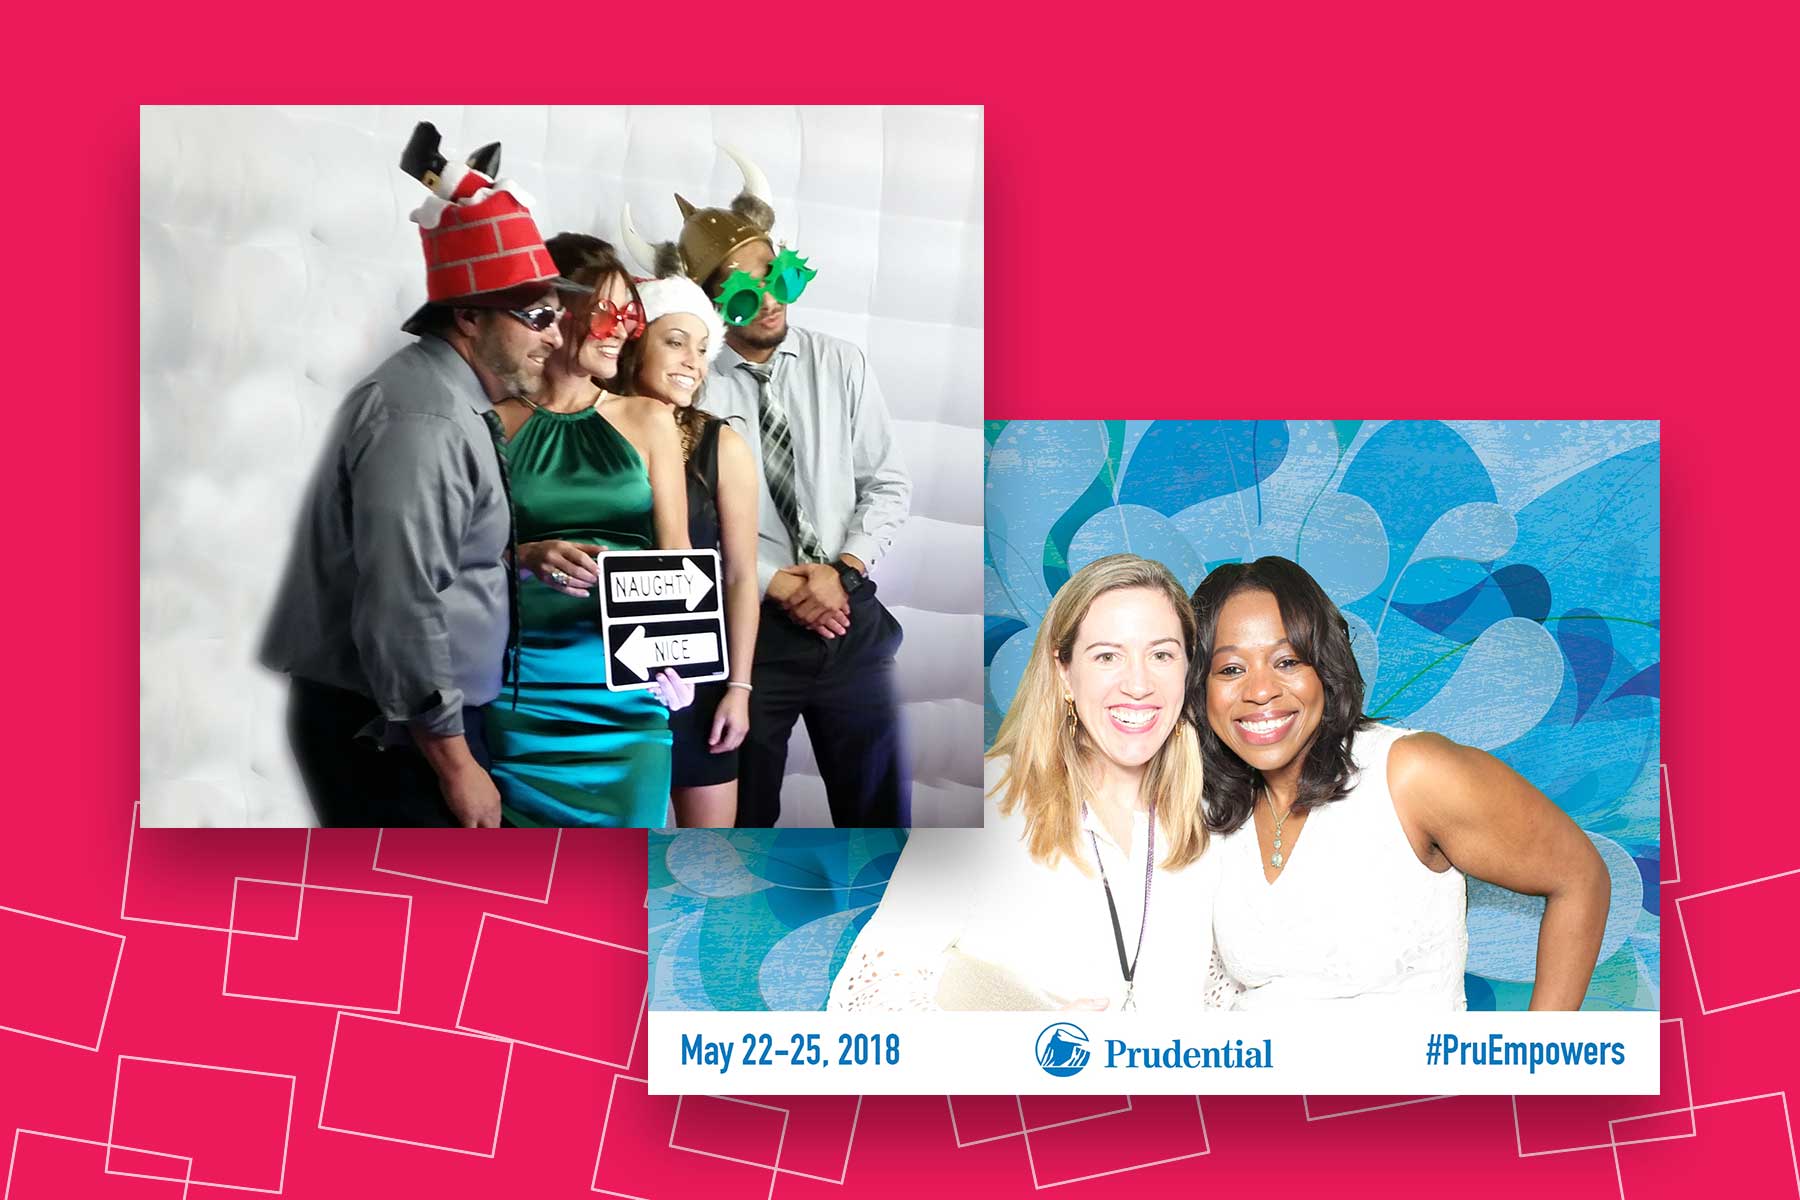 Social Maniac Photo Booth Rentals in Southwest Florida | Photo Magic Events, A SWFL Photo Booth & Event Rental Company